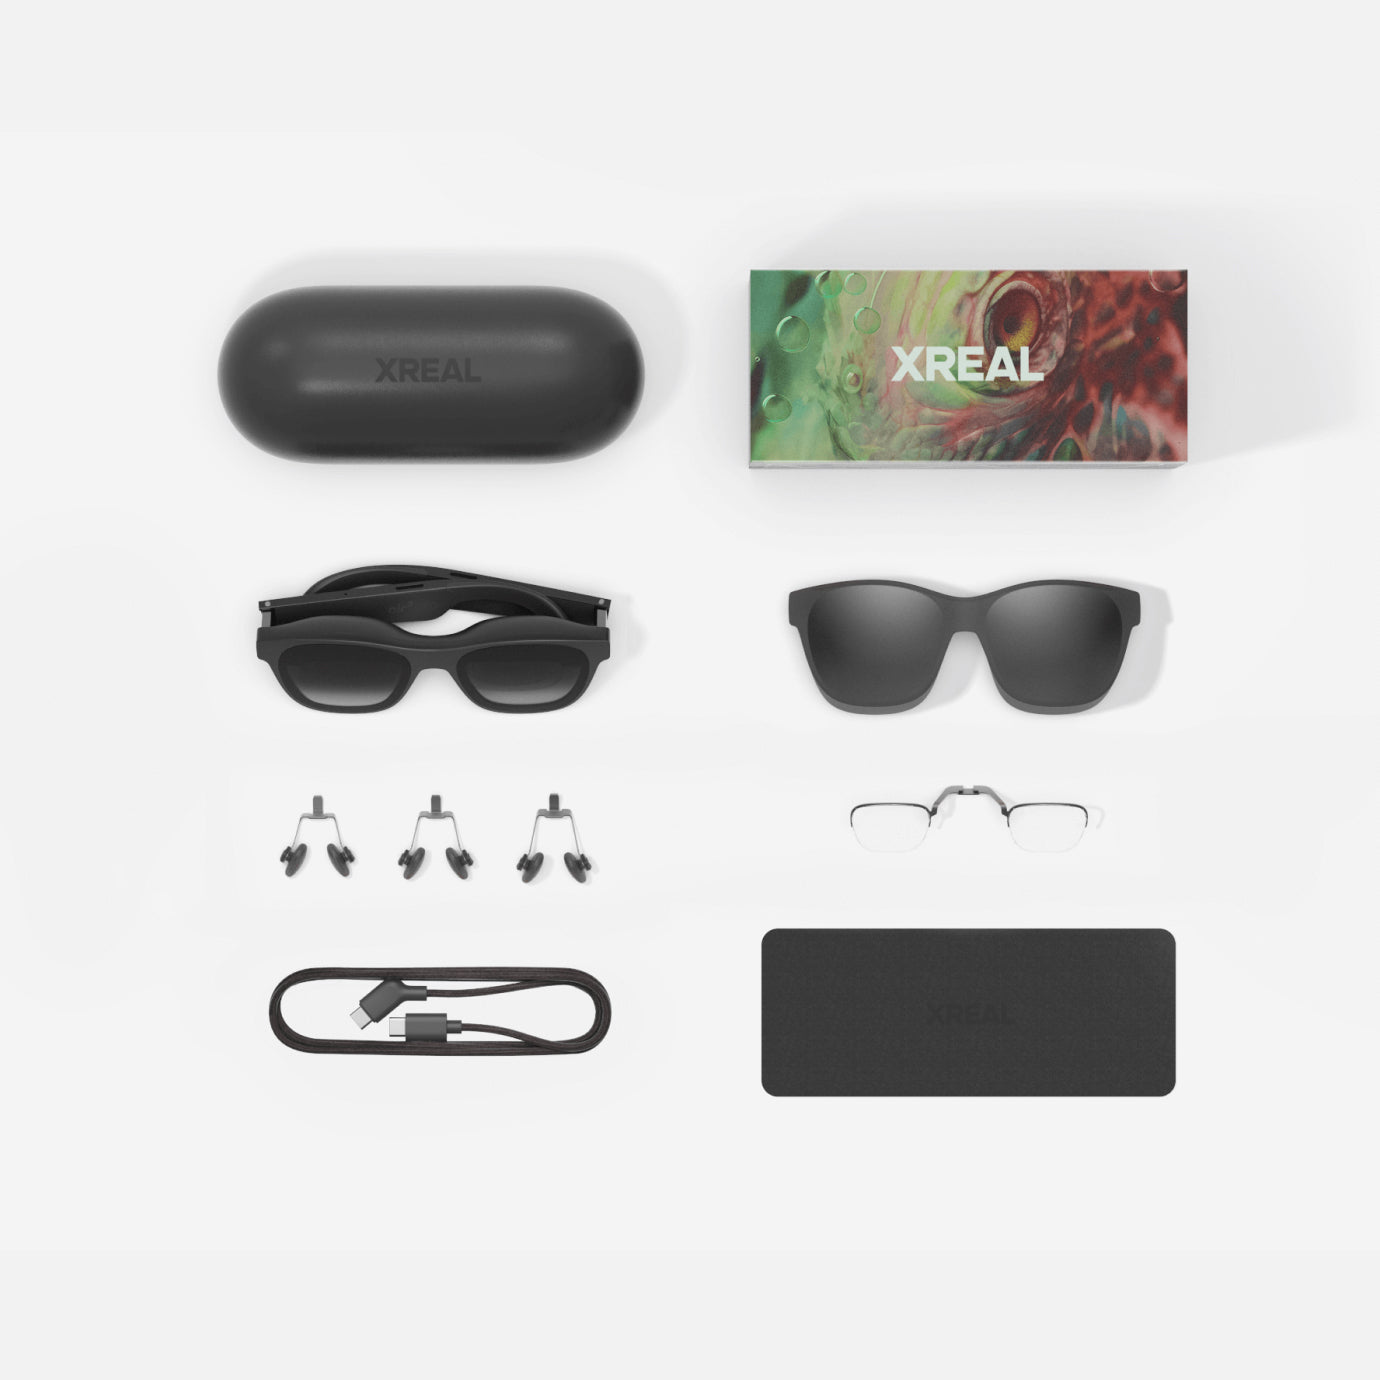 XREAL Air 2 and Air 2 Pro AR Glasses launched in China, pricing